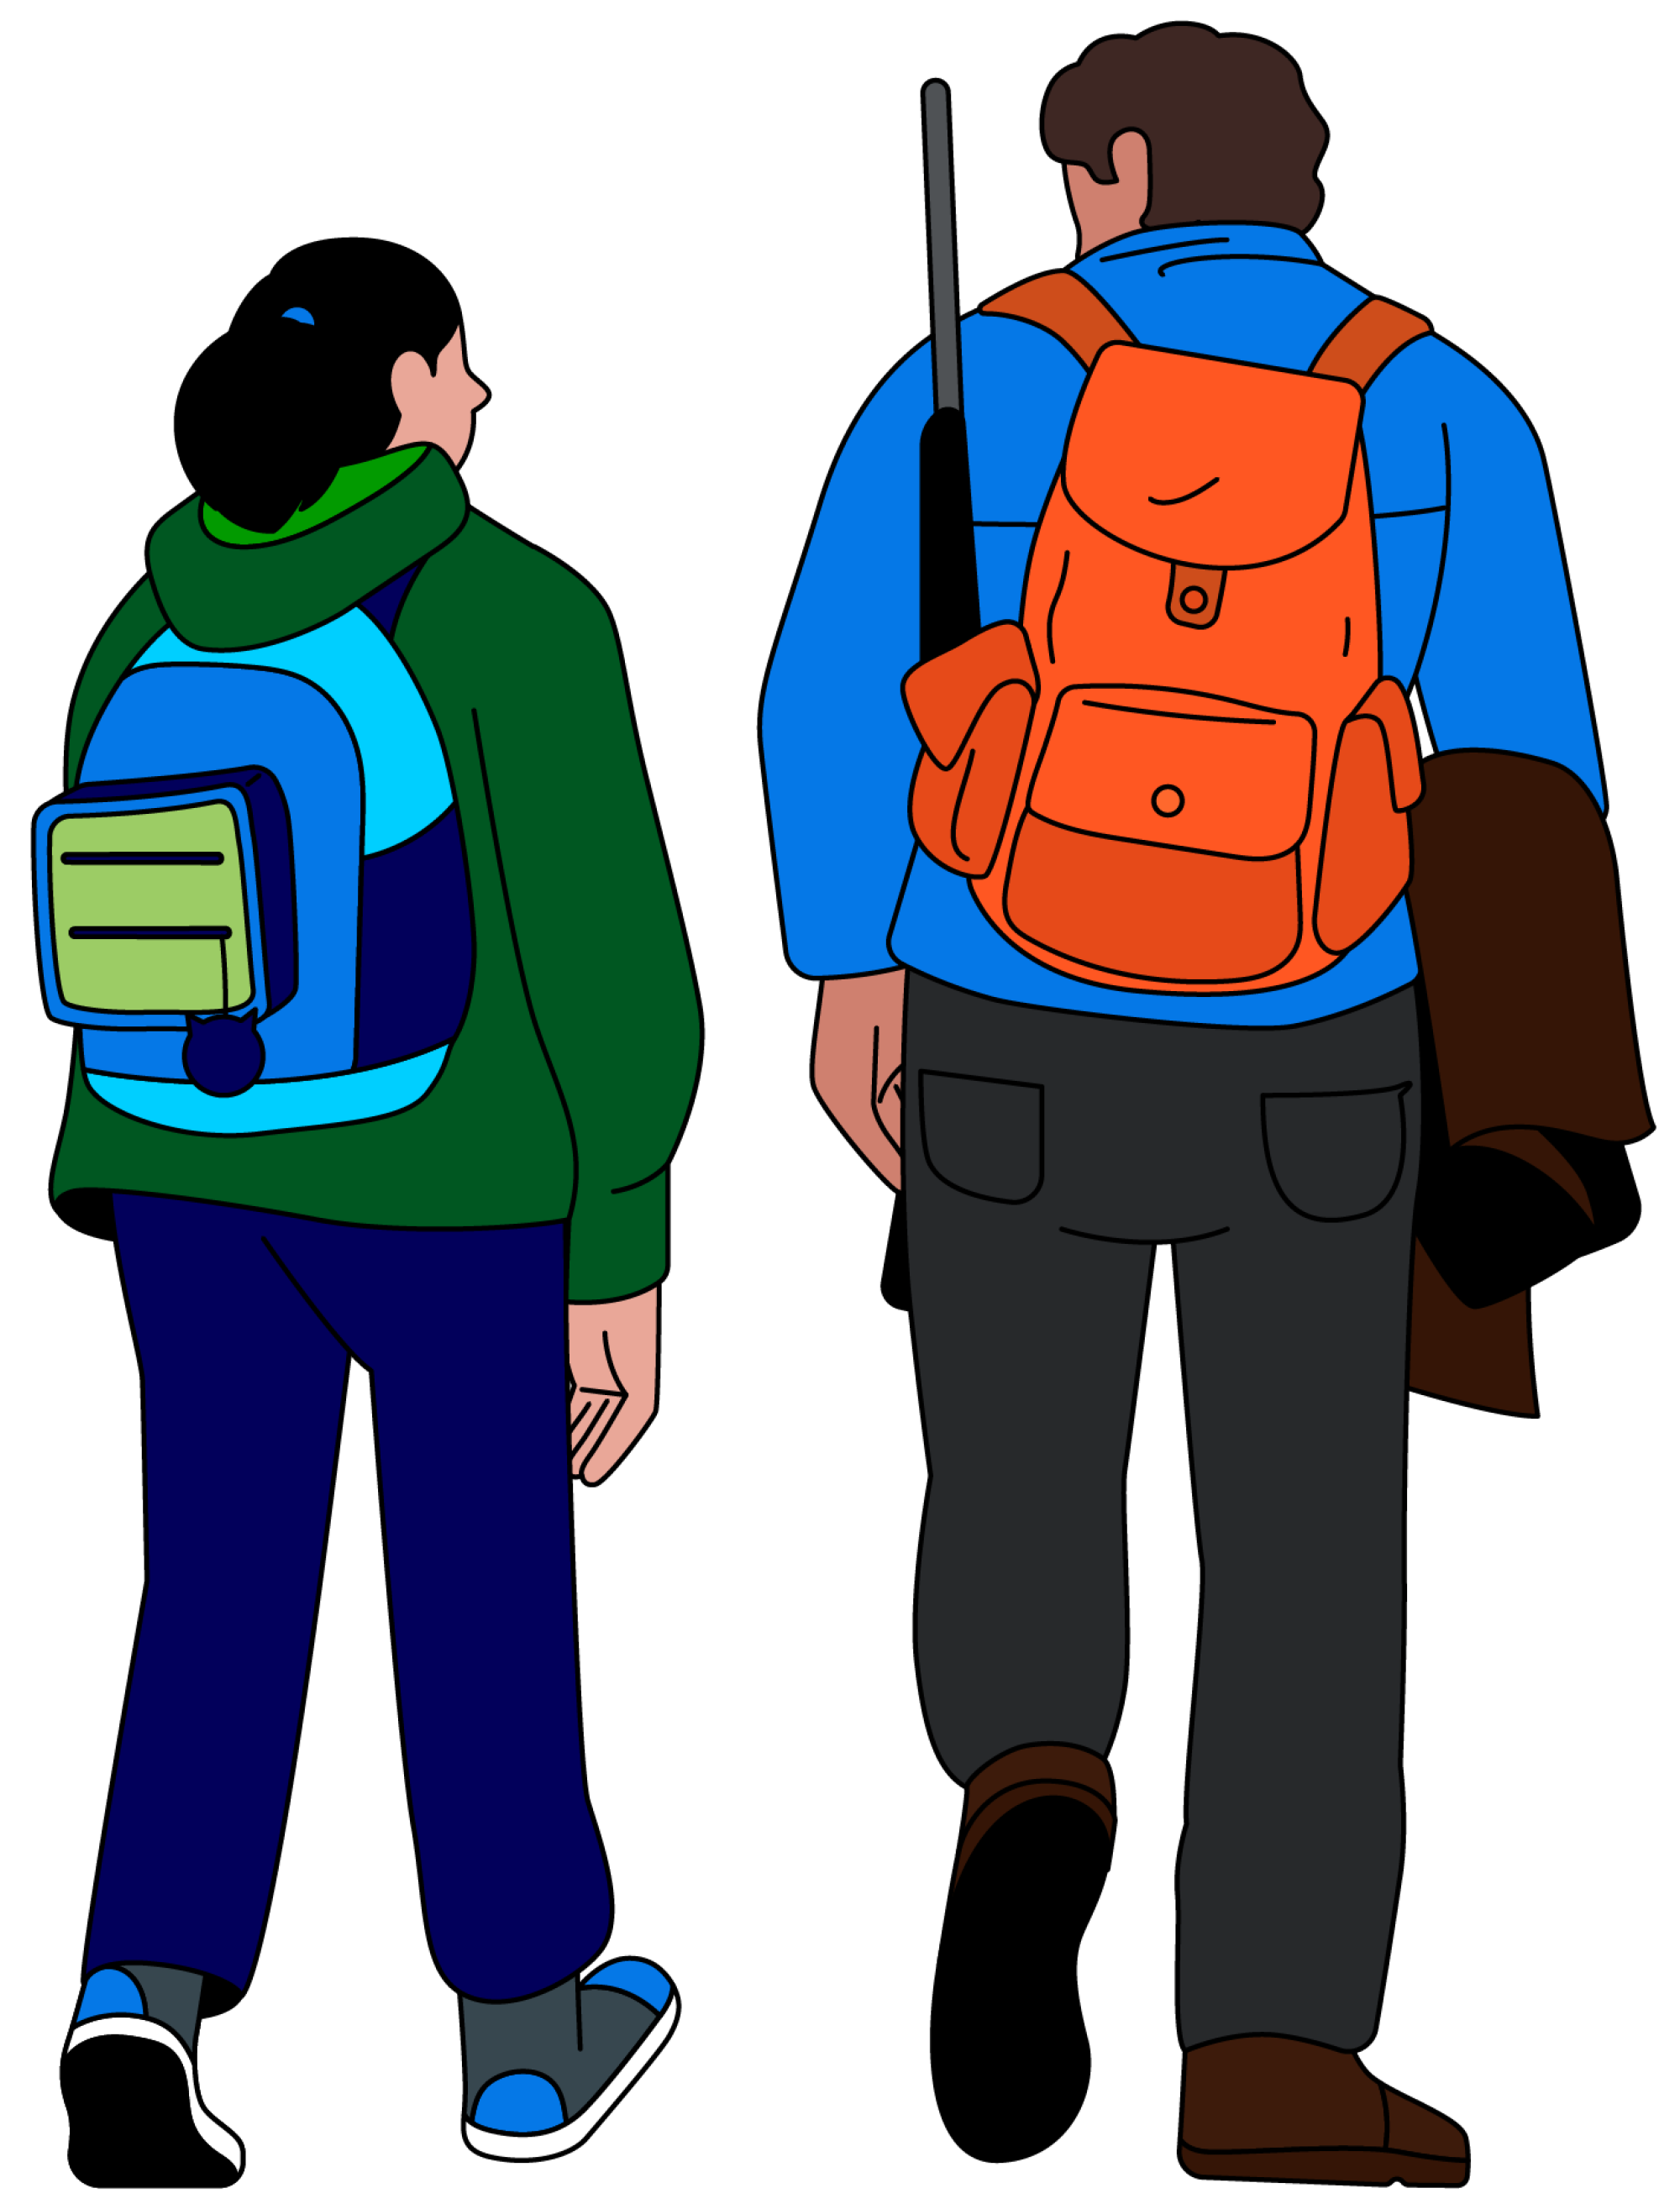 Illustration of Pedro and Bella from "The Last of Us" with backpacks on